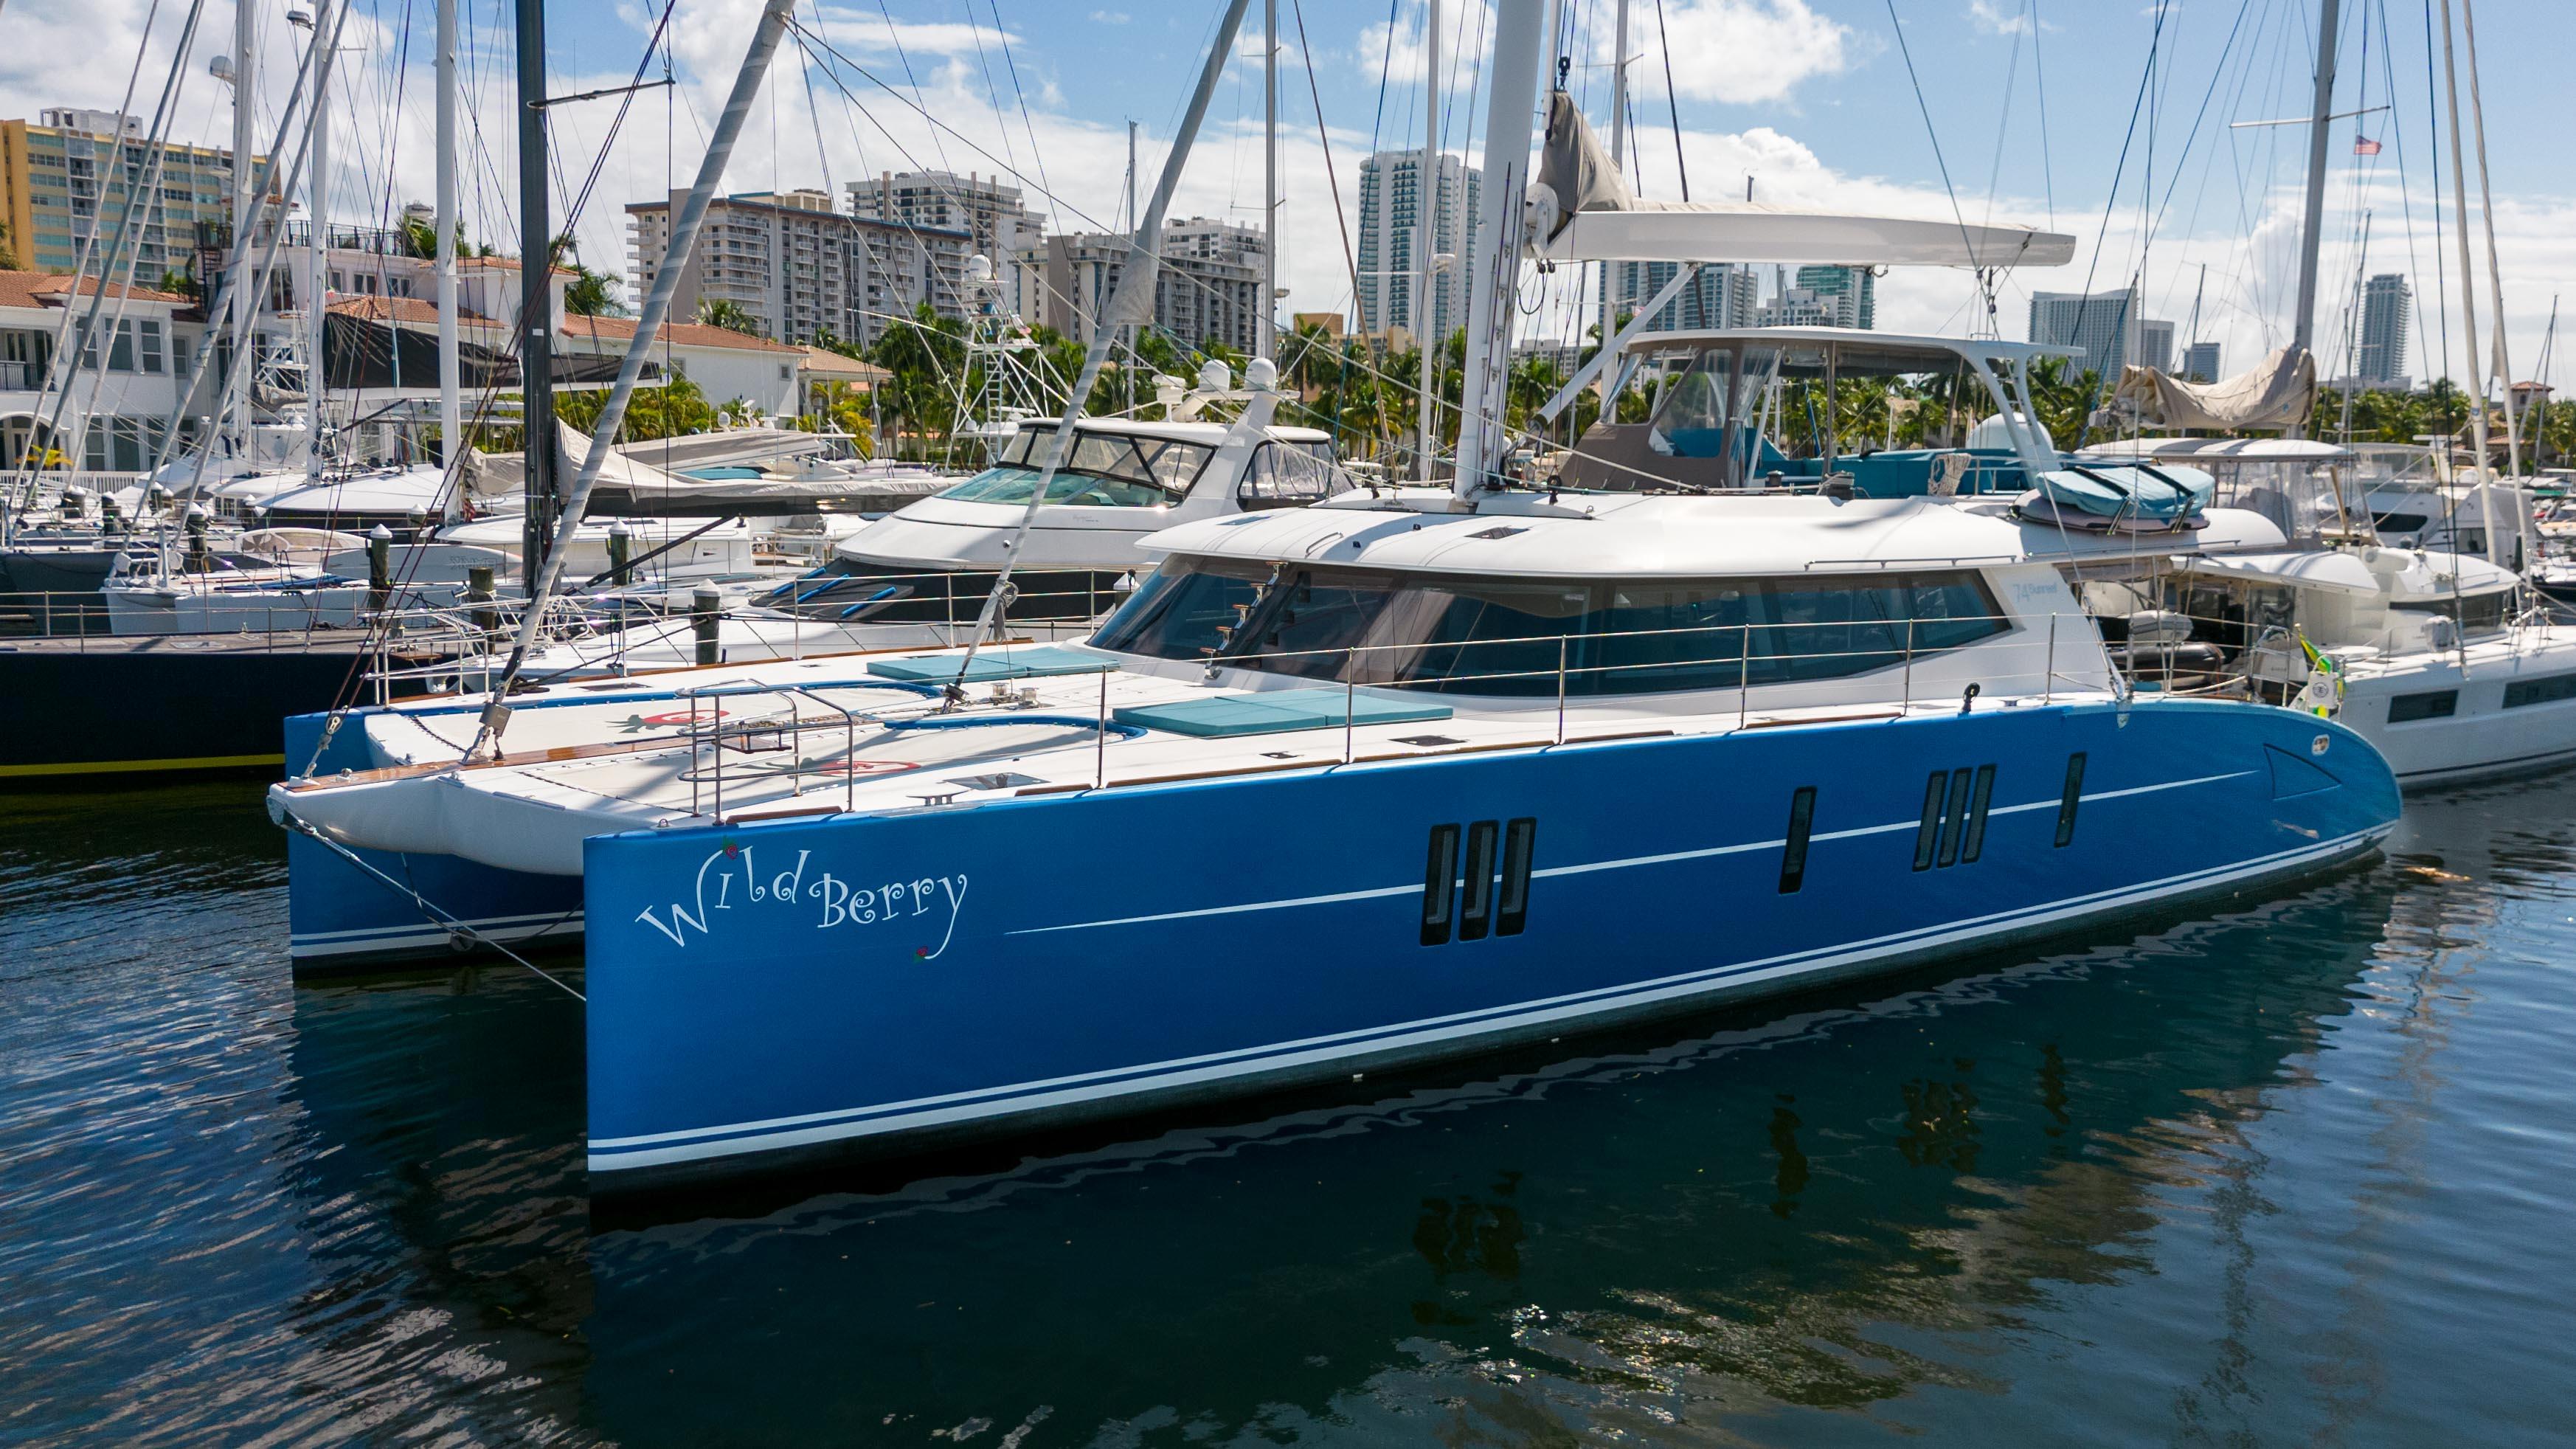 2015 sunreef 74 sail edition wildberry hollywood florida for sale